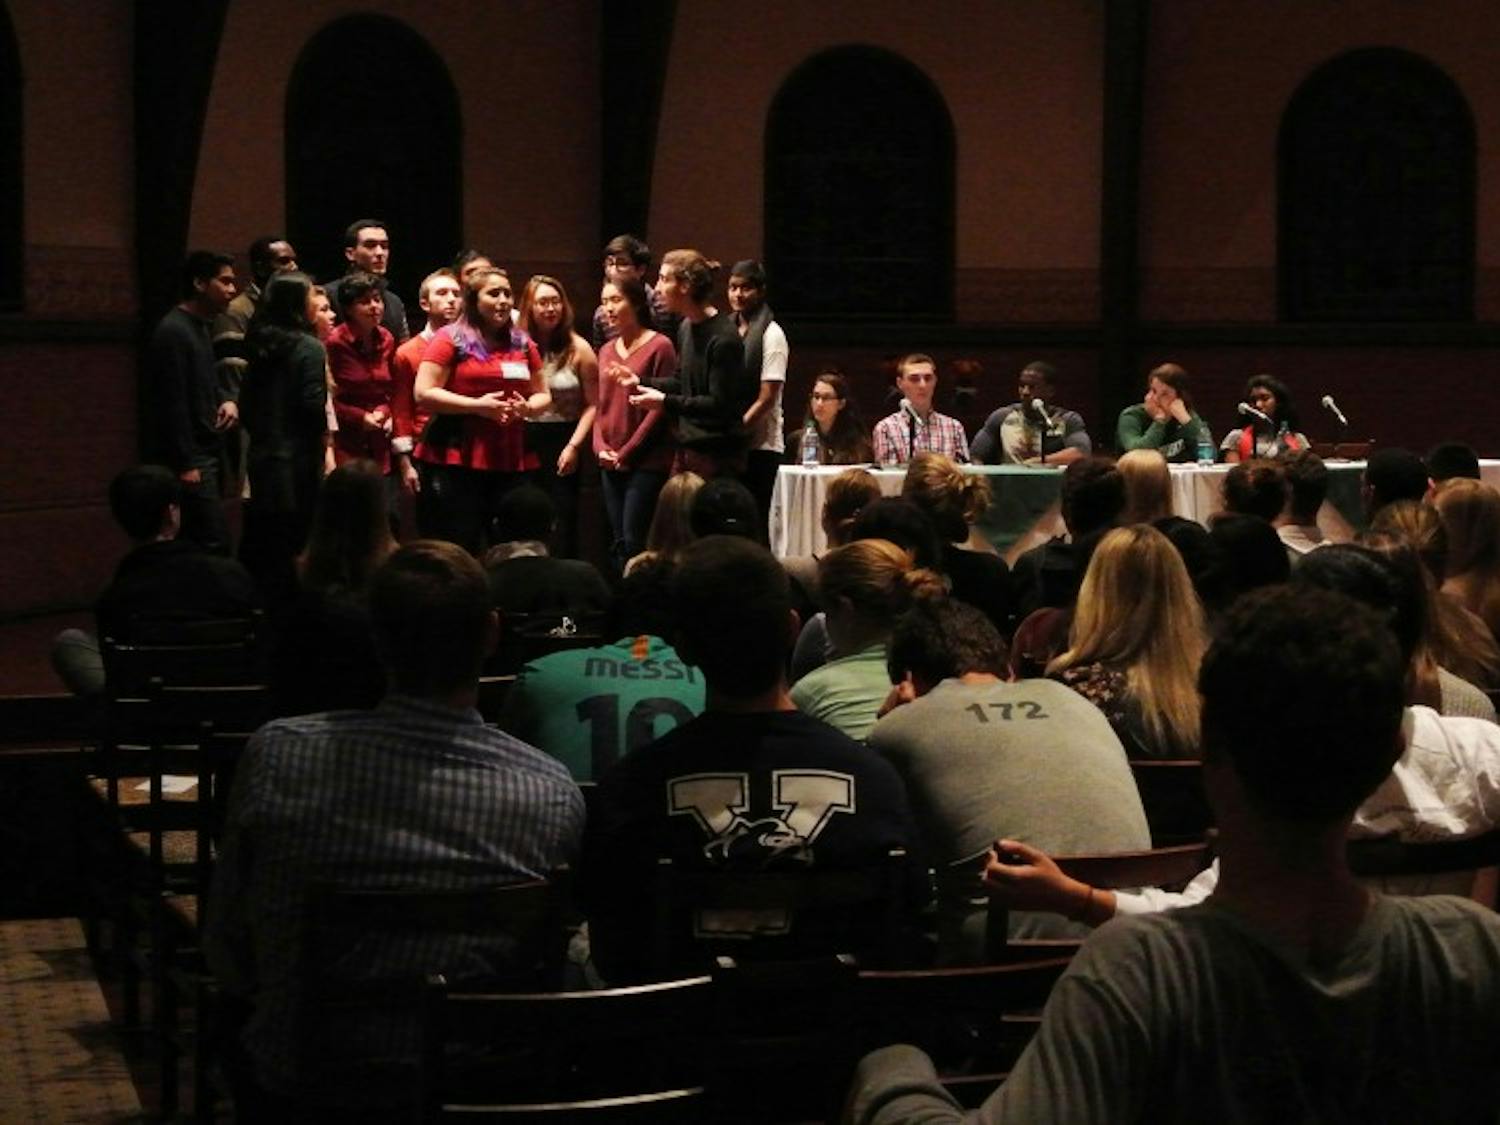 An a cappella group performs at the Student Assembly event on Thursday.